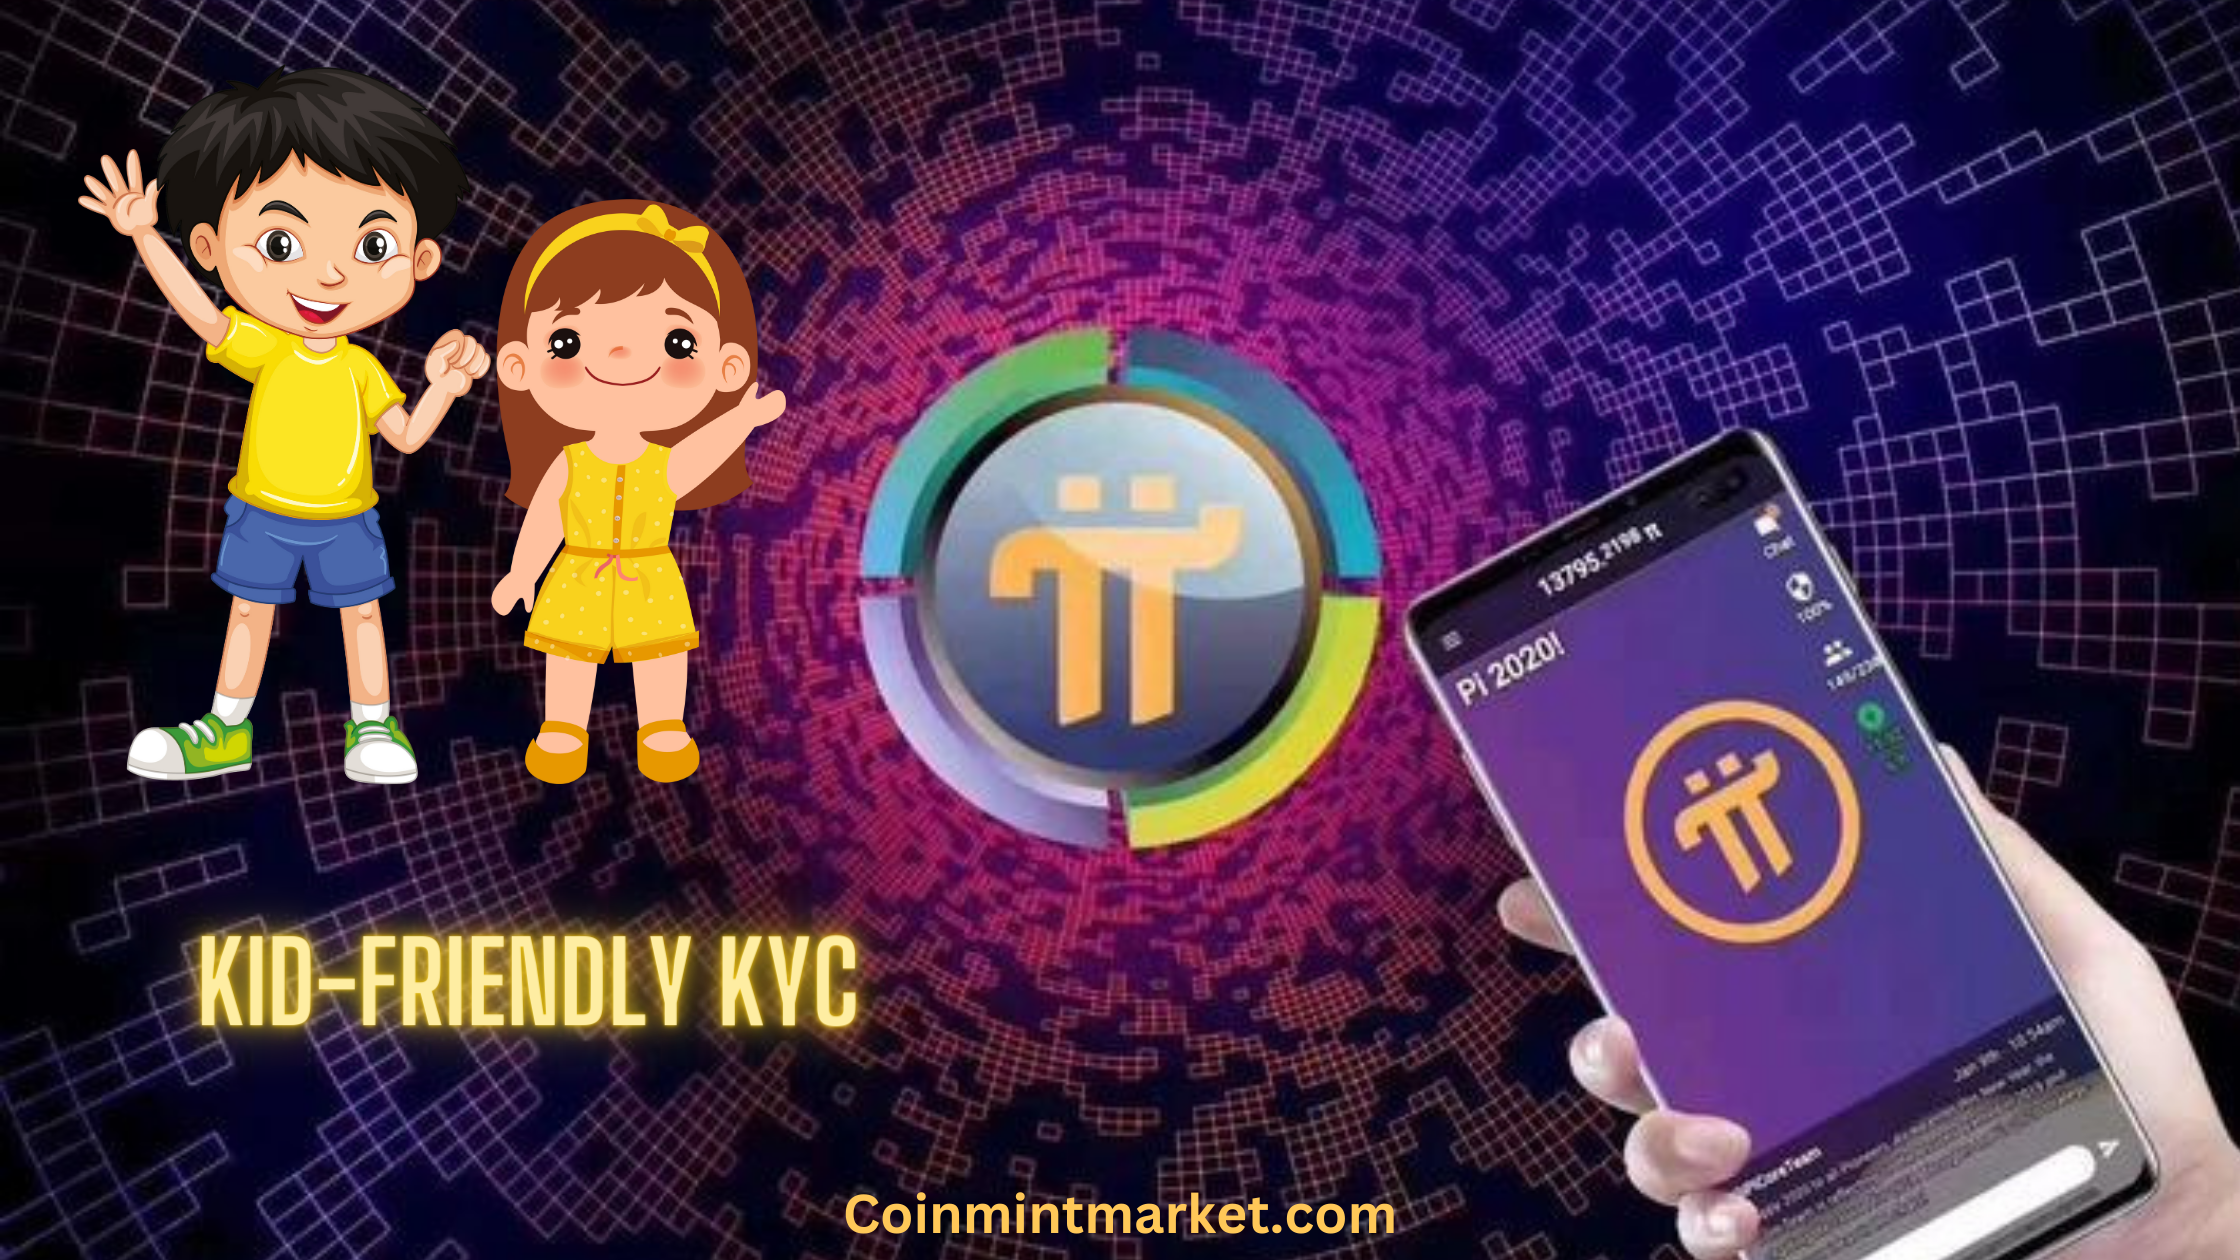 Pi Network kid-friendly kyc process showing kids in this pic.